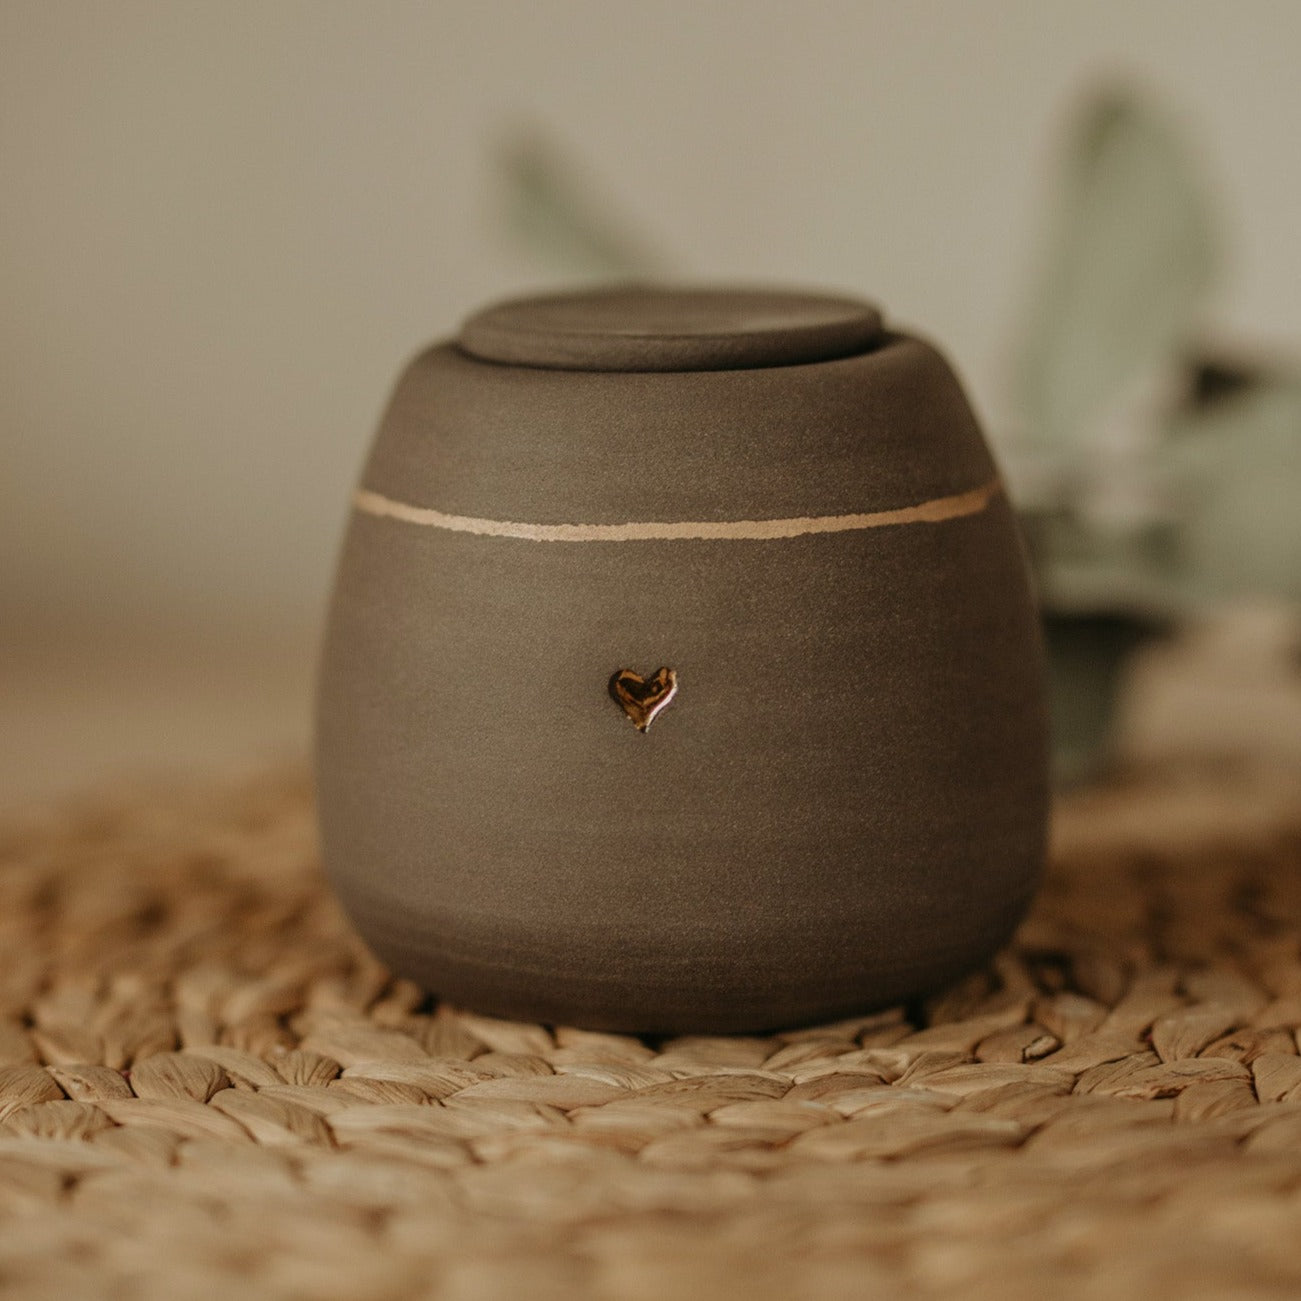 Ceramic urn for small dog ashes